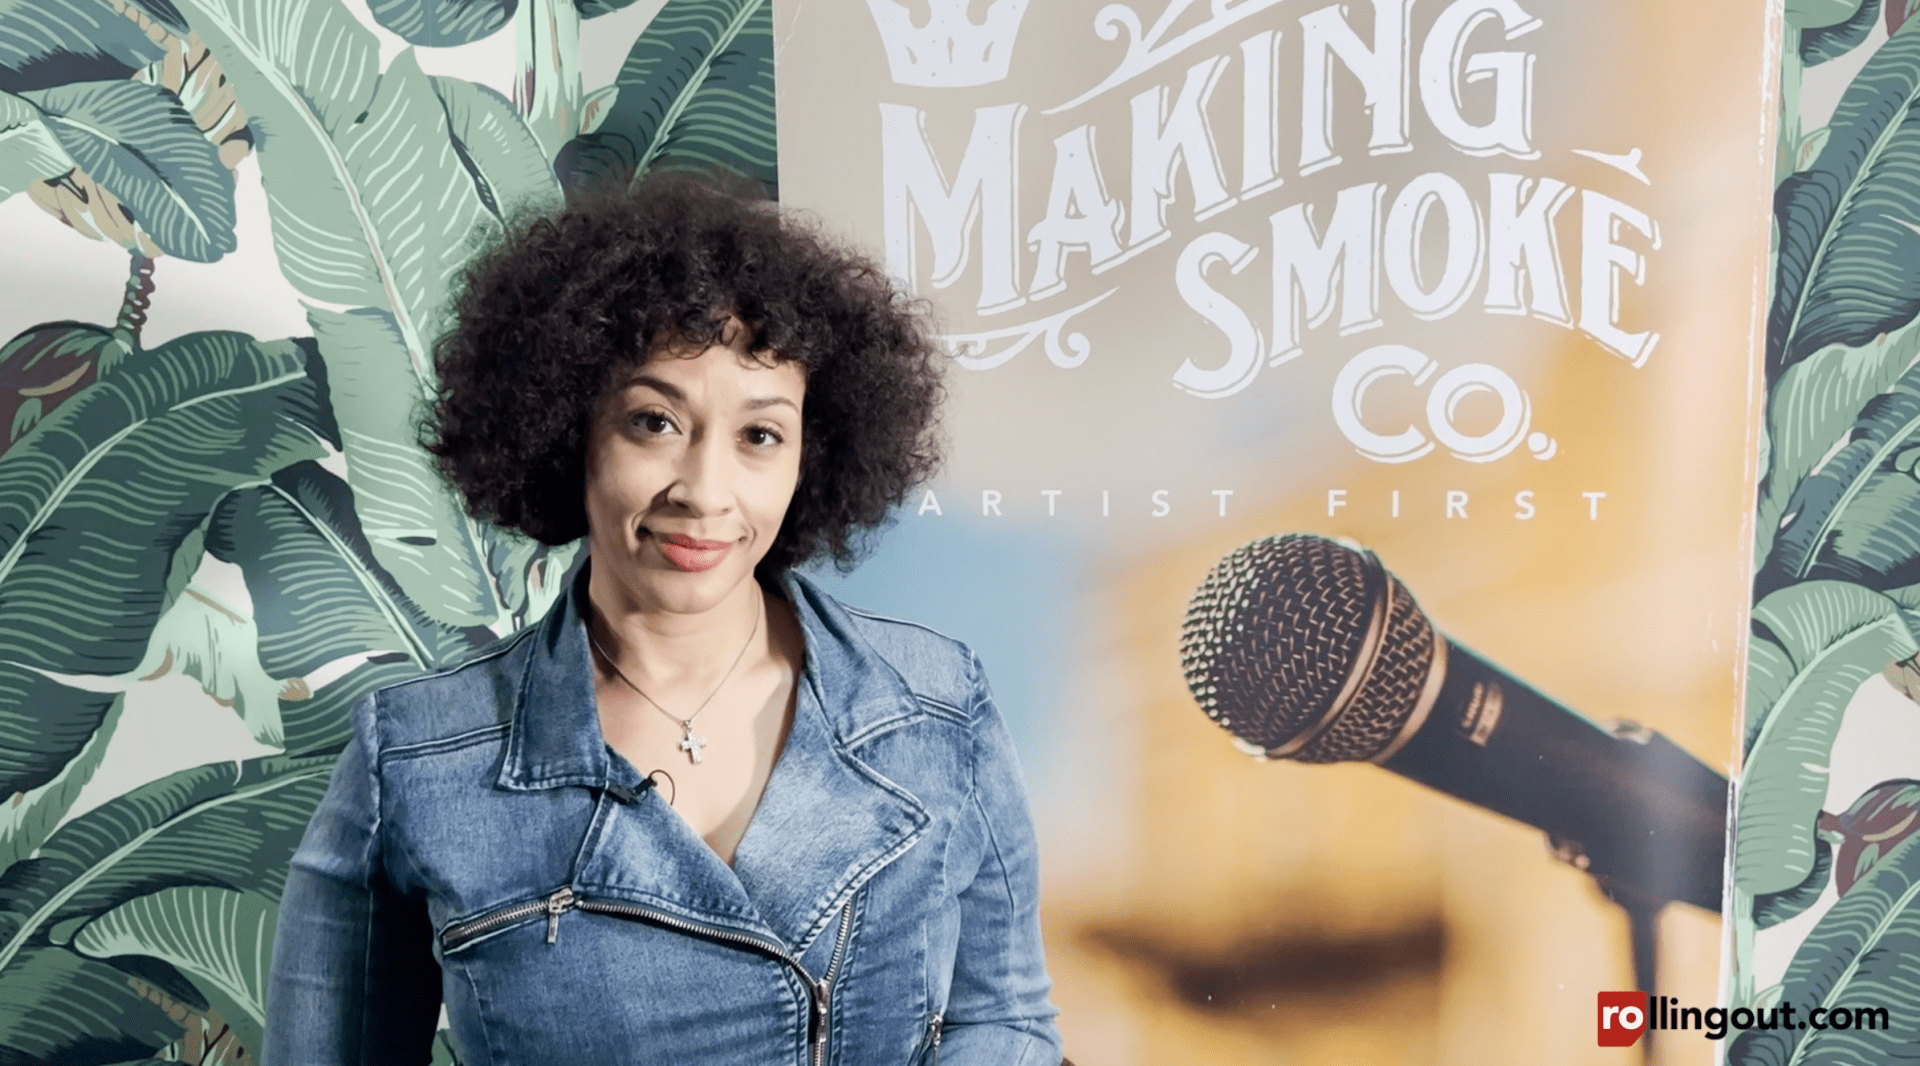 Von Decarlo says comedians need to learn to write jokes, not ad-lib